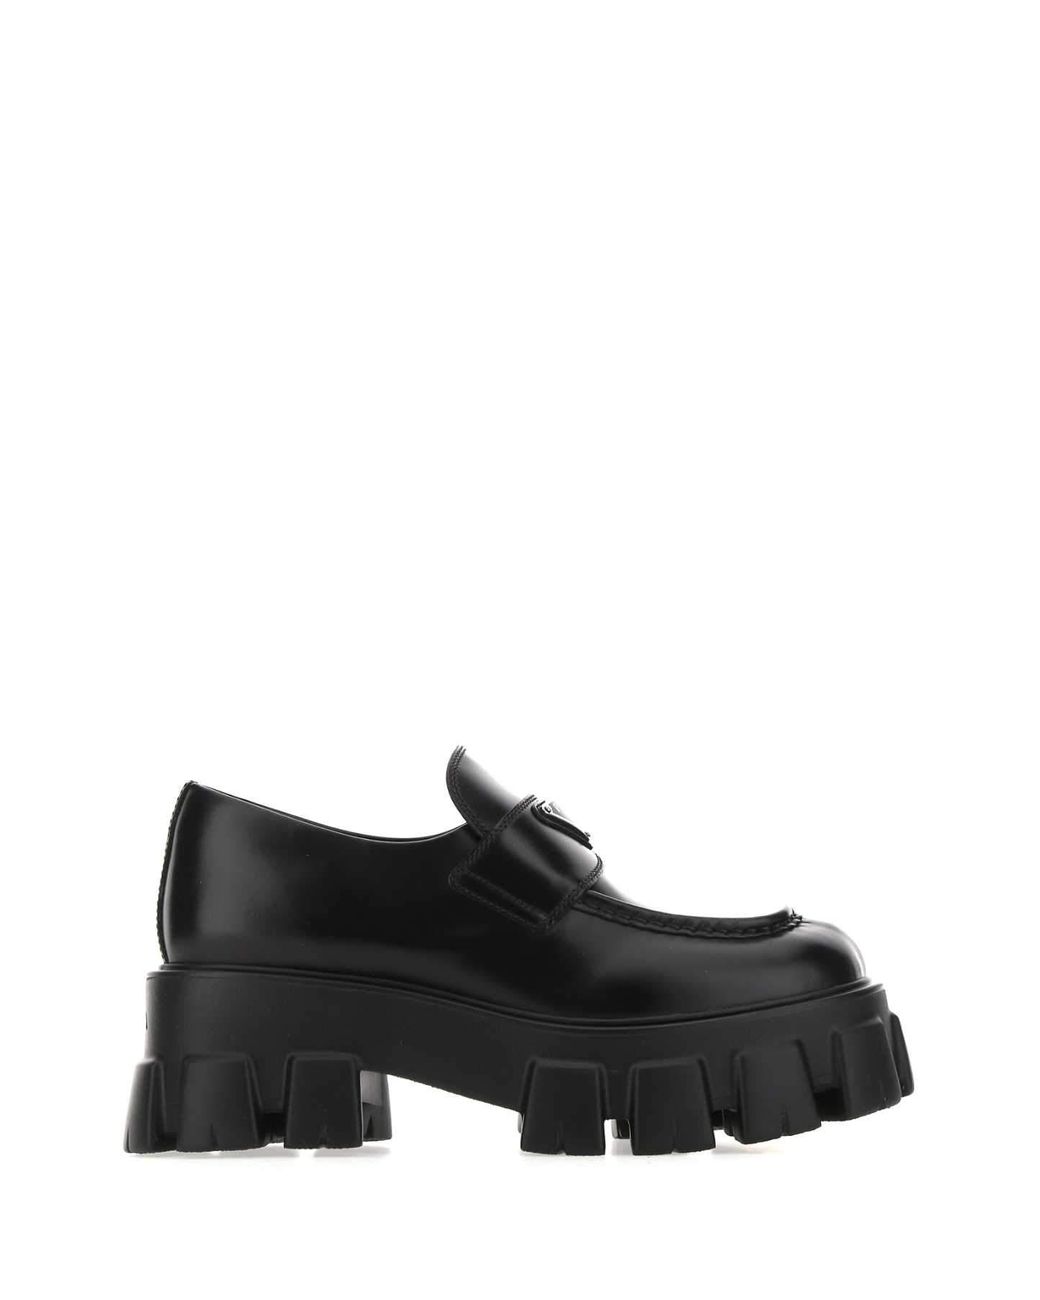 Prada Leather Monolith Loafers in Black | Lyst